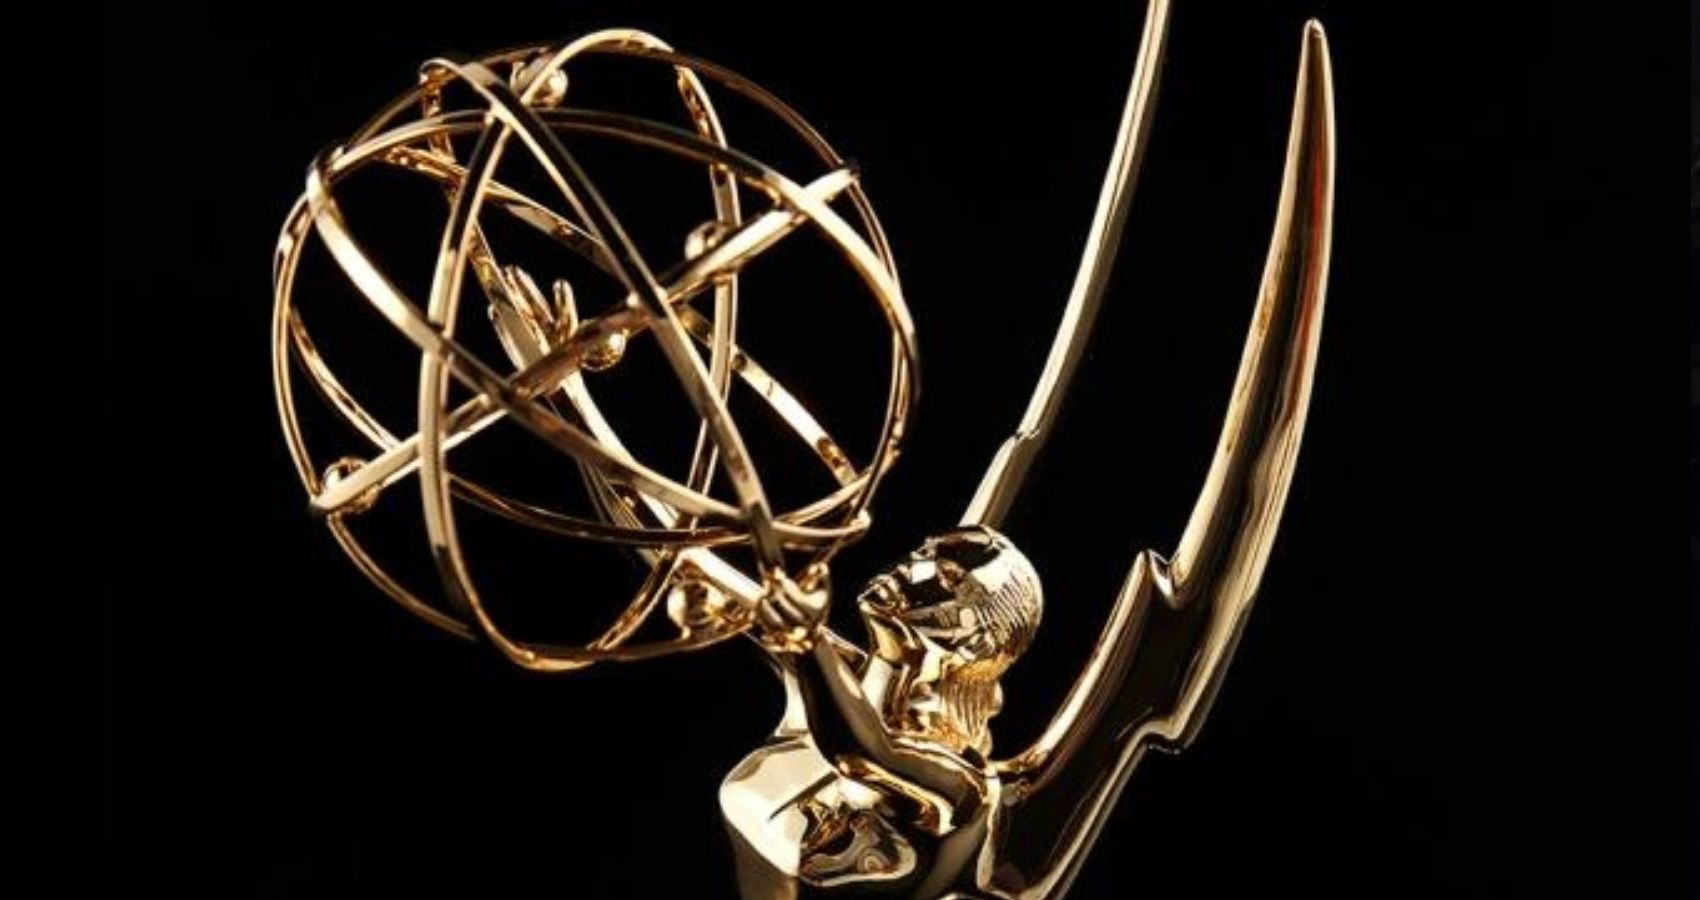 Predictions for 74th emmys